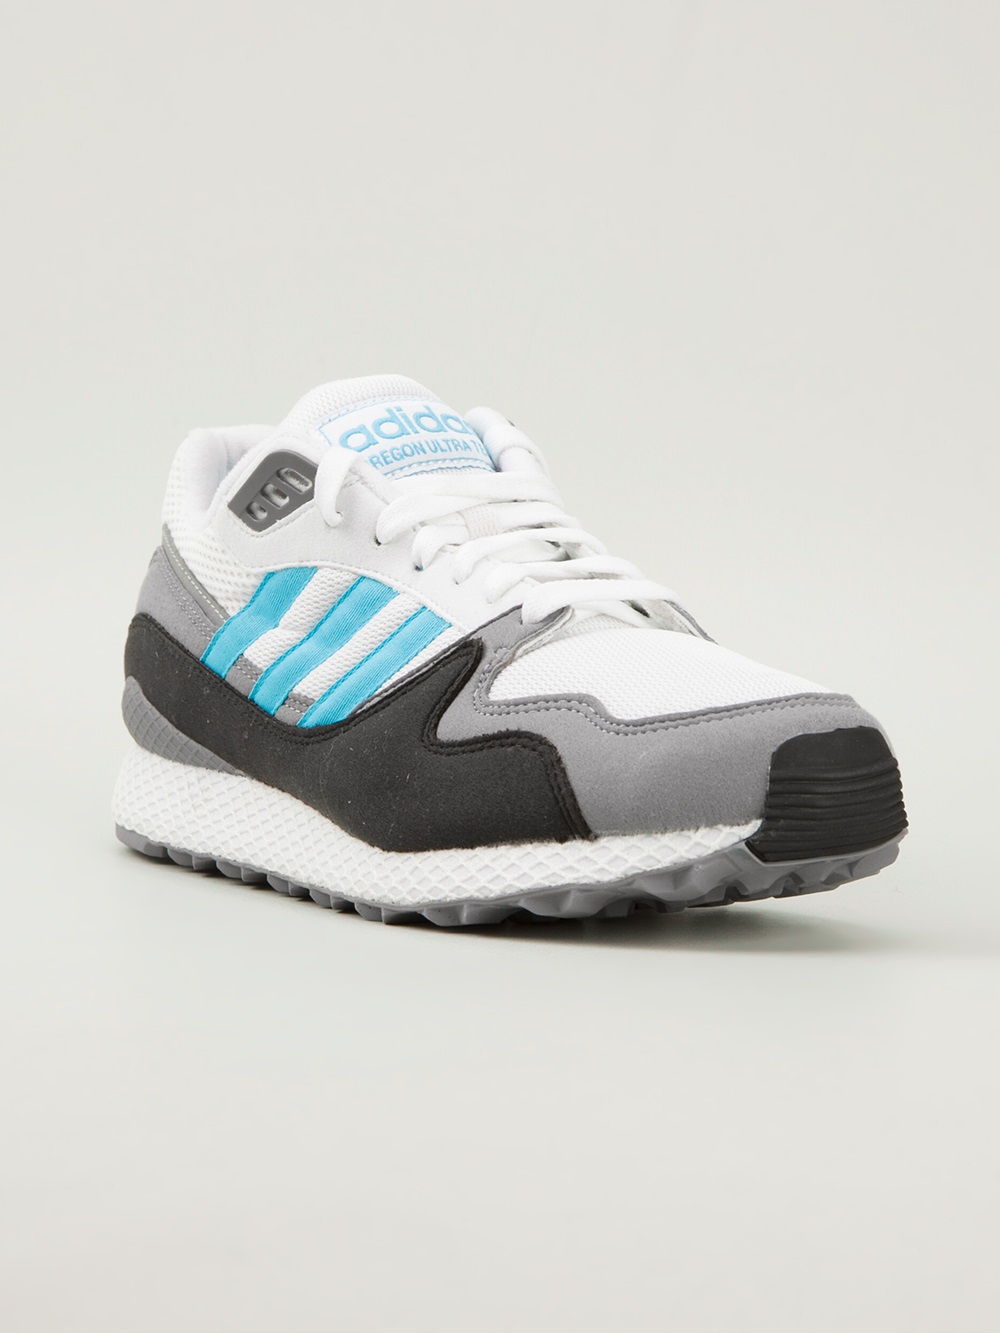 Adidas Oregon Ult Trainers In White Gray For Men Lyst